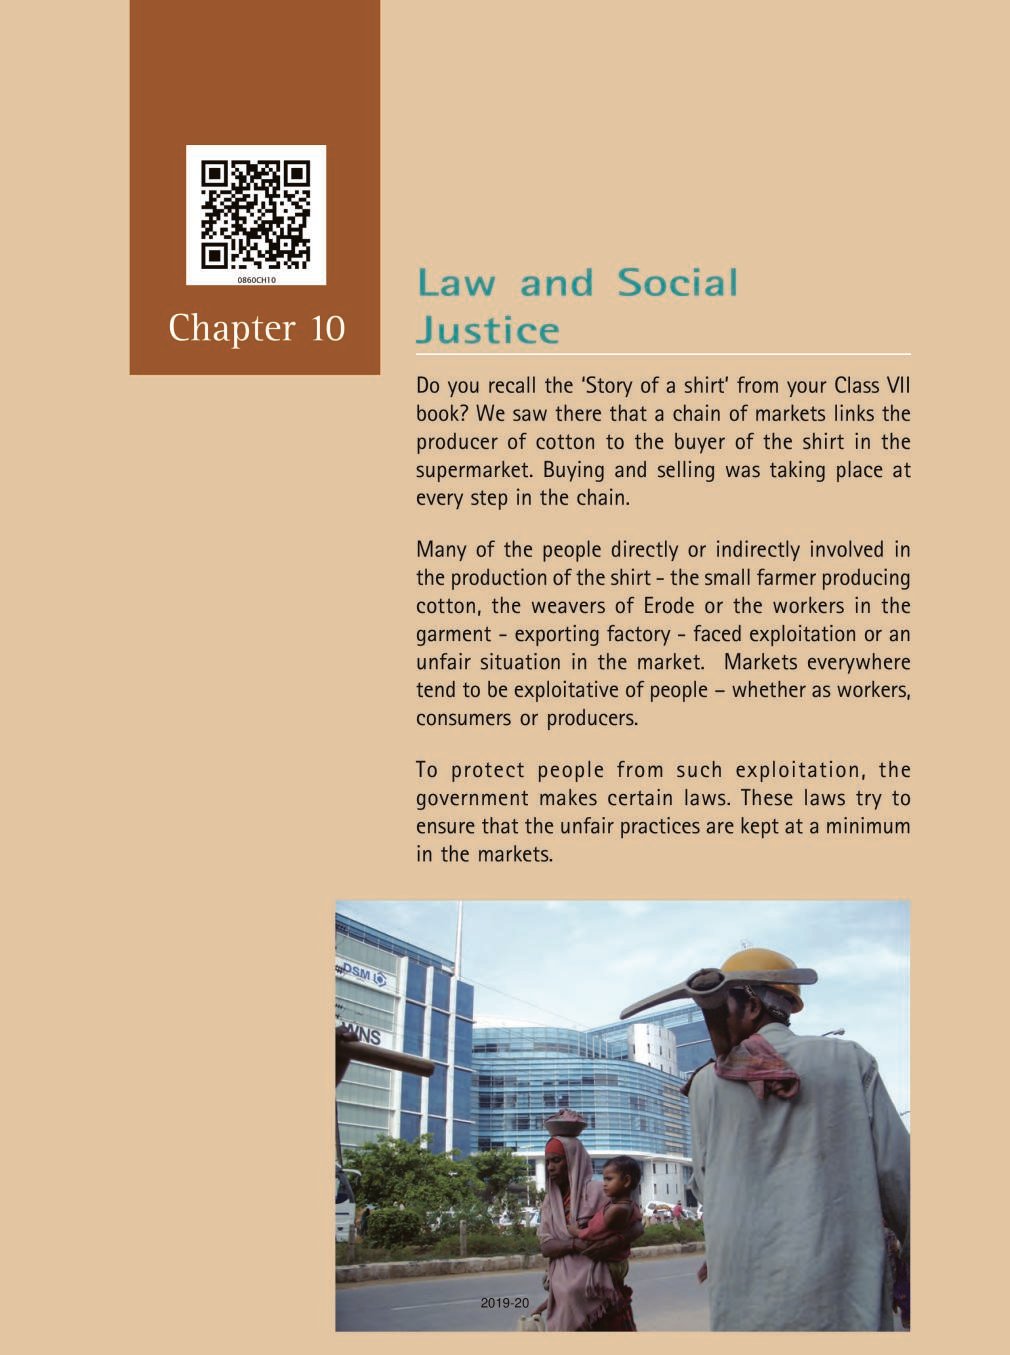 NCERT Book Class 8 Social Science (Civics) Chapter 10 Law and Social Justice - Page 1